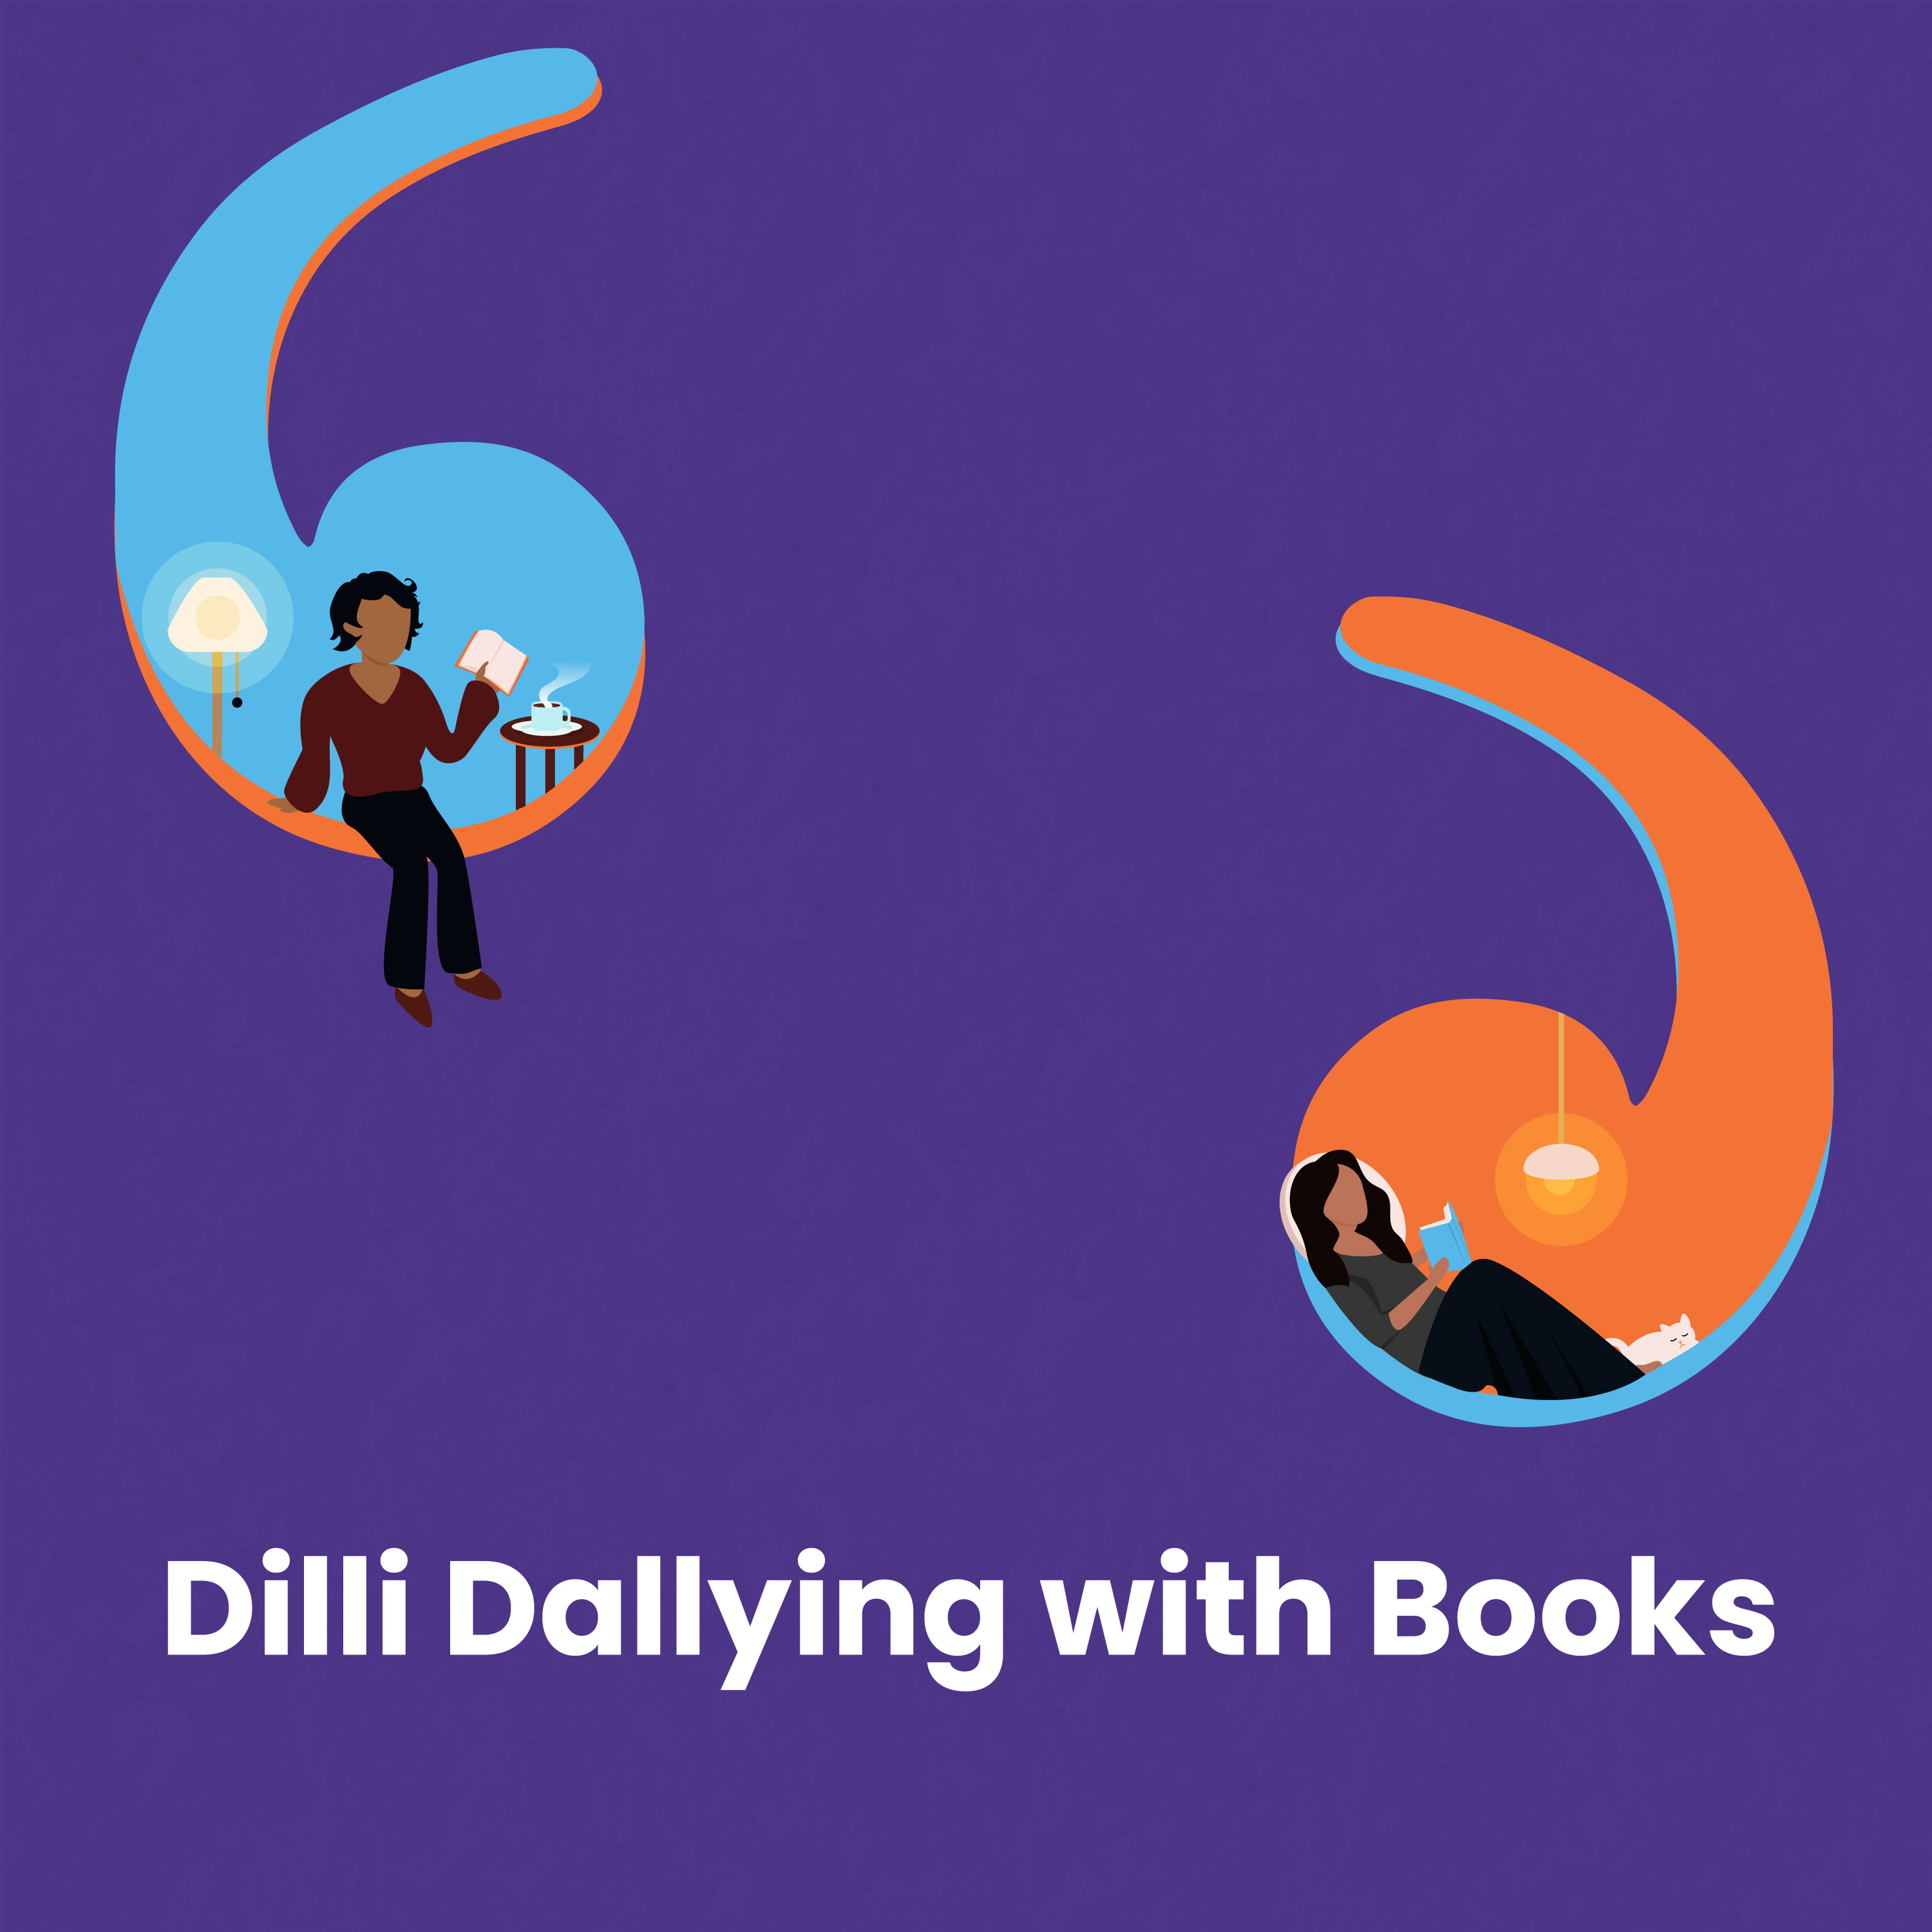 Dilli Dallying with Books